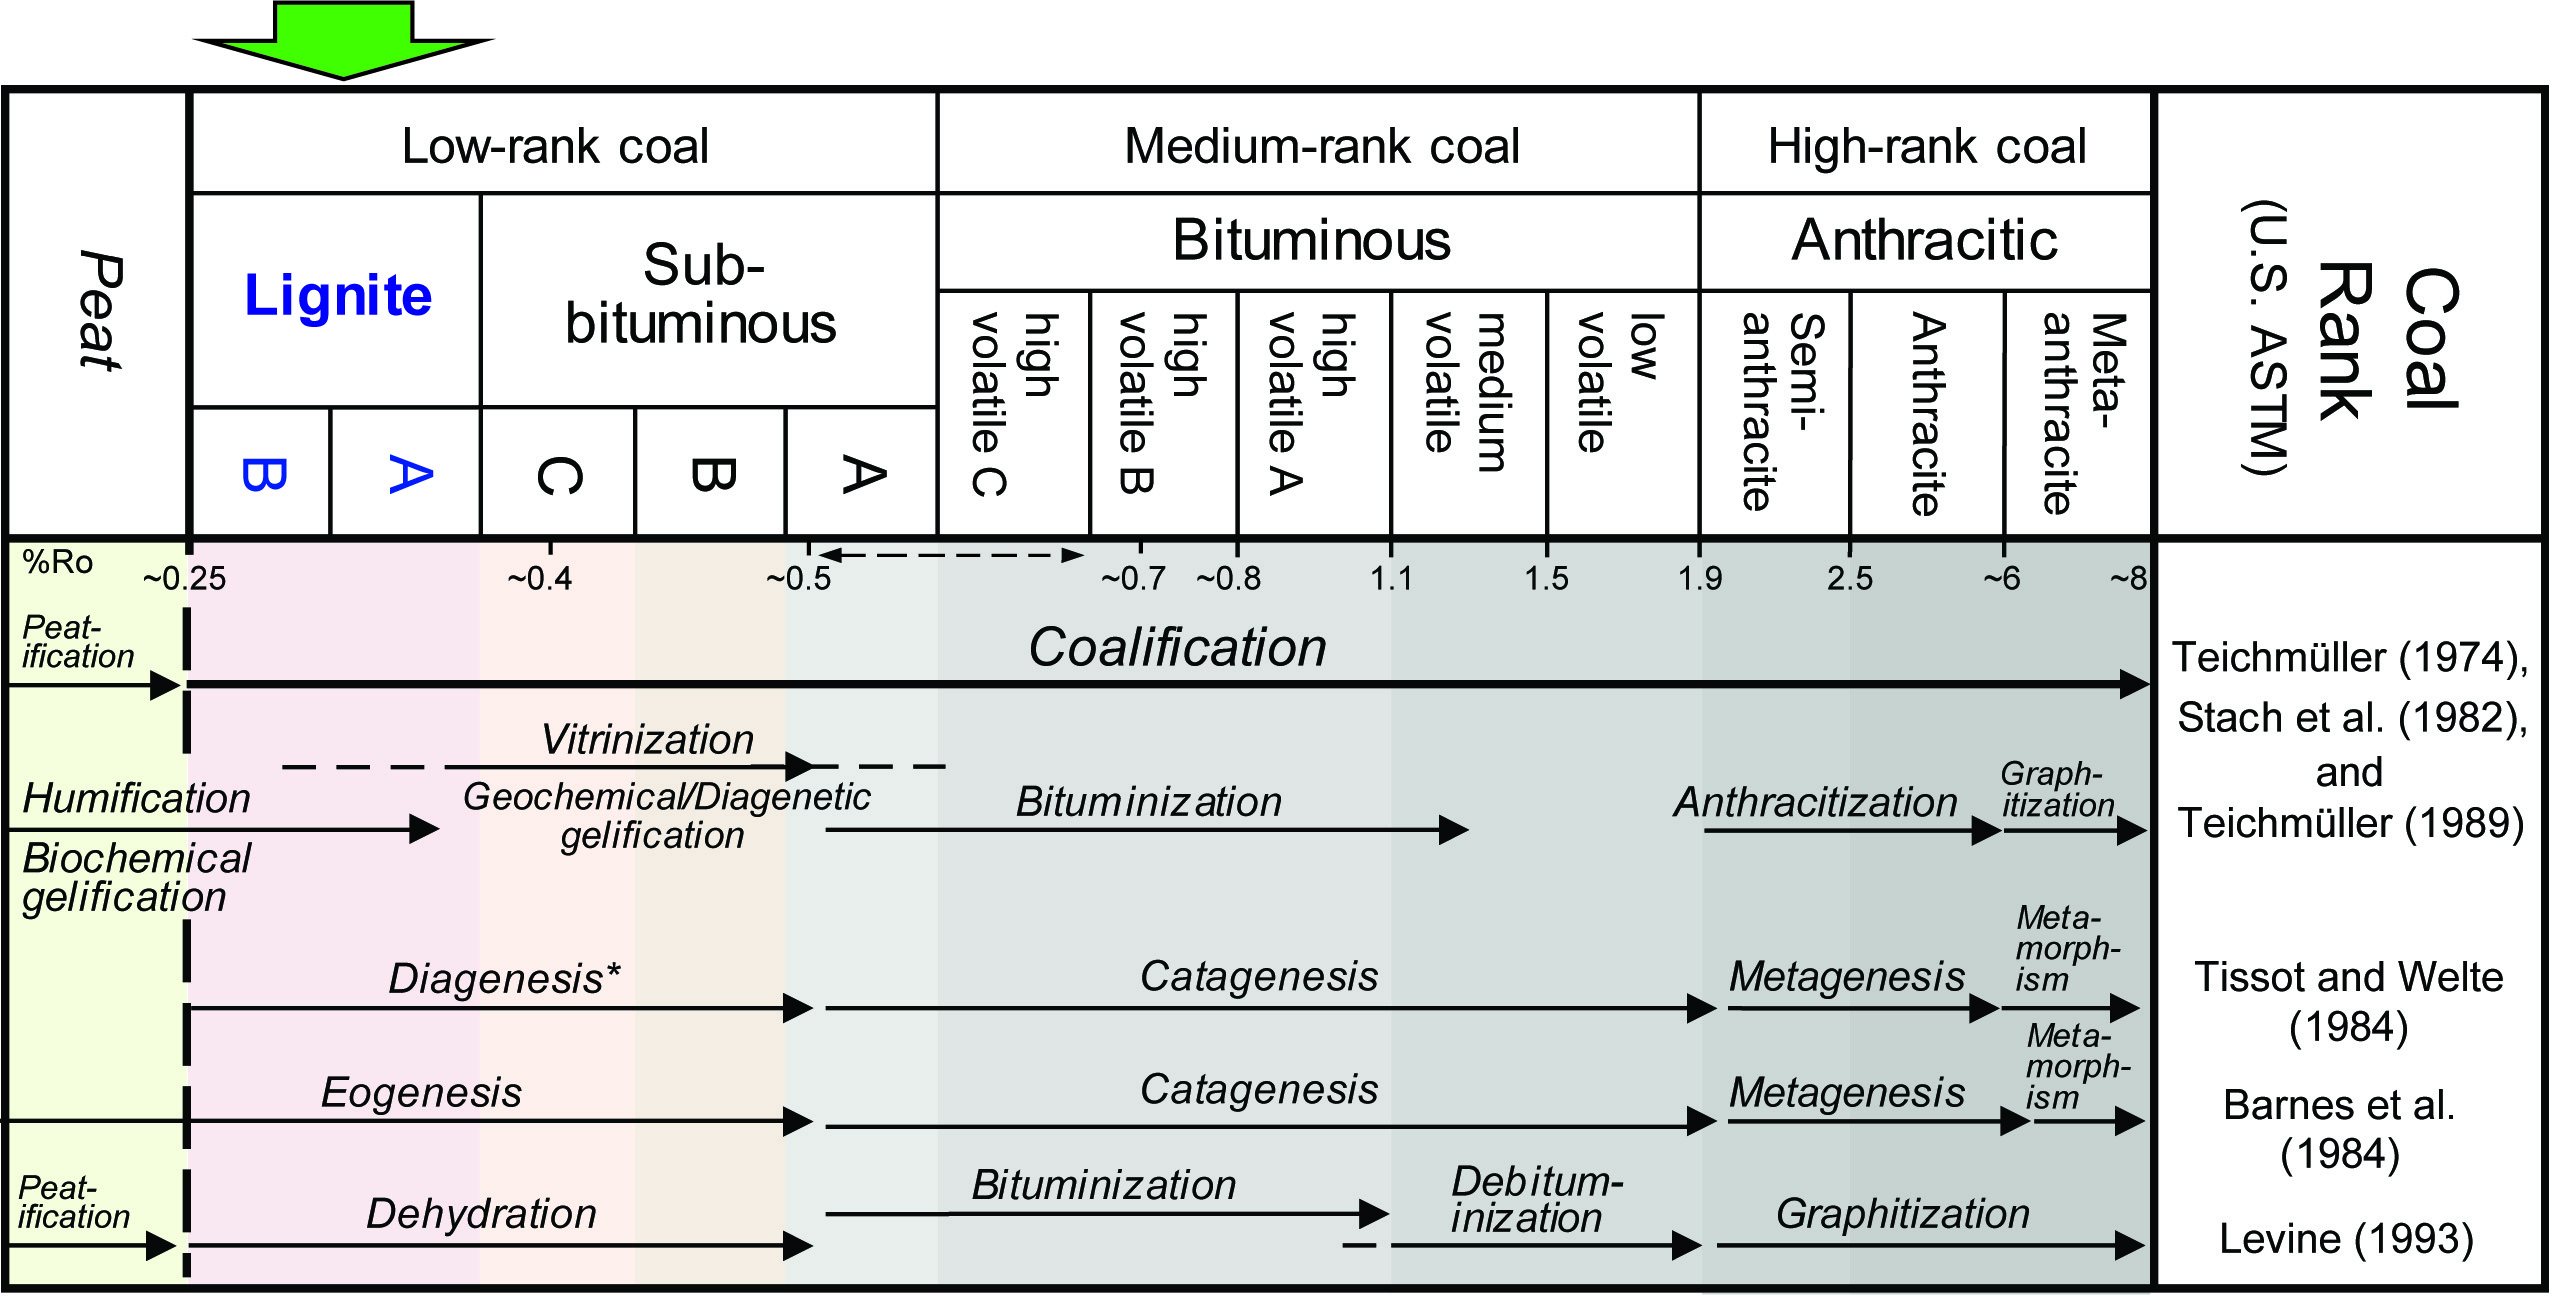 Stages of coalification cited in different reports relative to their approximate U.S. coal rank. The term diagenesis was used by Tissot and Welte (1984) for the initial stages of coalification but it has also been used for the entire coalification process. %Ro= Vitrinite reflectance in oil. %Ro data from Teichmüller and Teichmüller (1982). In the U.S. rank system, vitrinite reflectance values overlap between subbituminous A and high volatile bituminous C ranks, which is shown here as a dashed line.